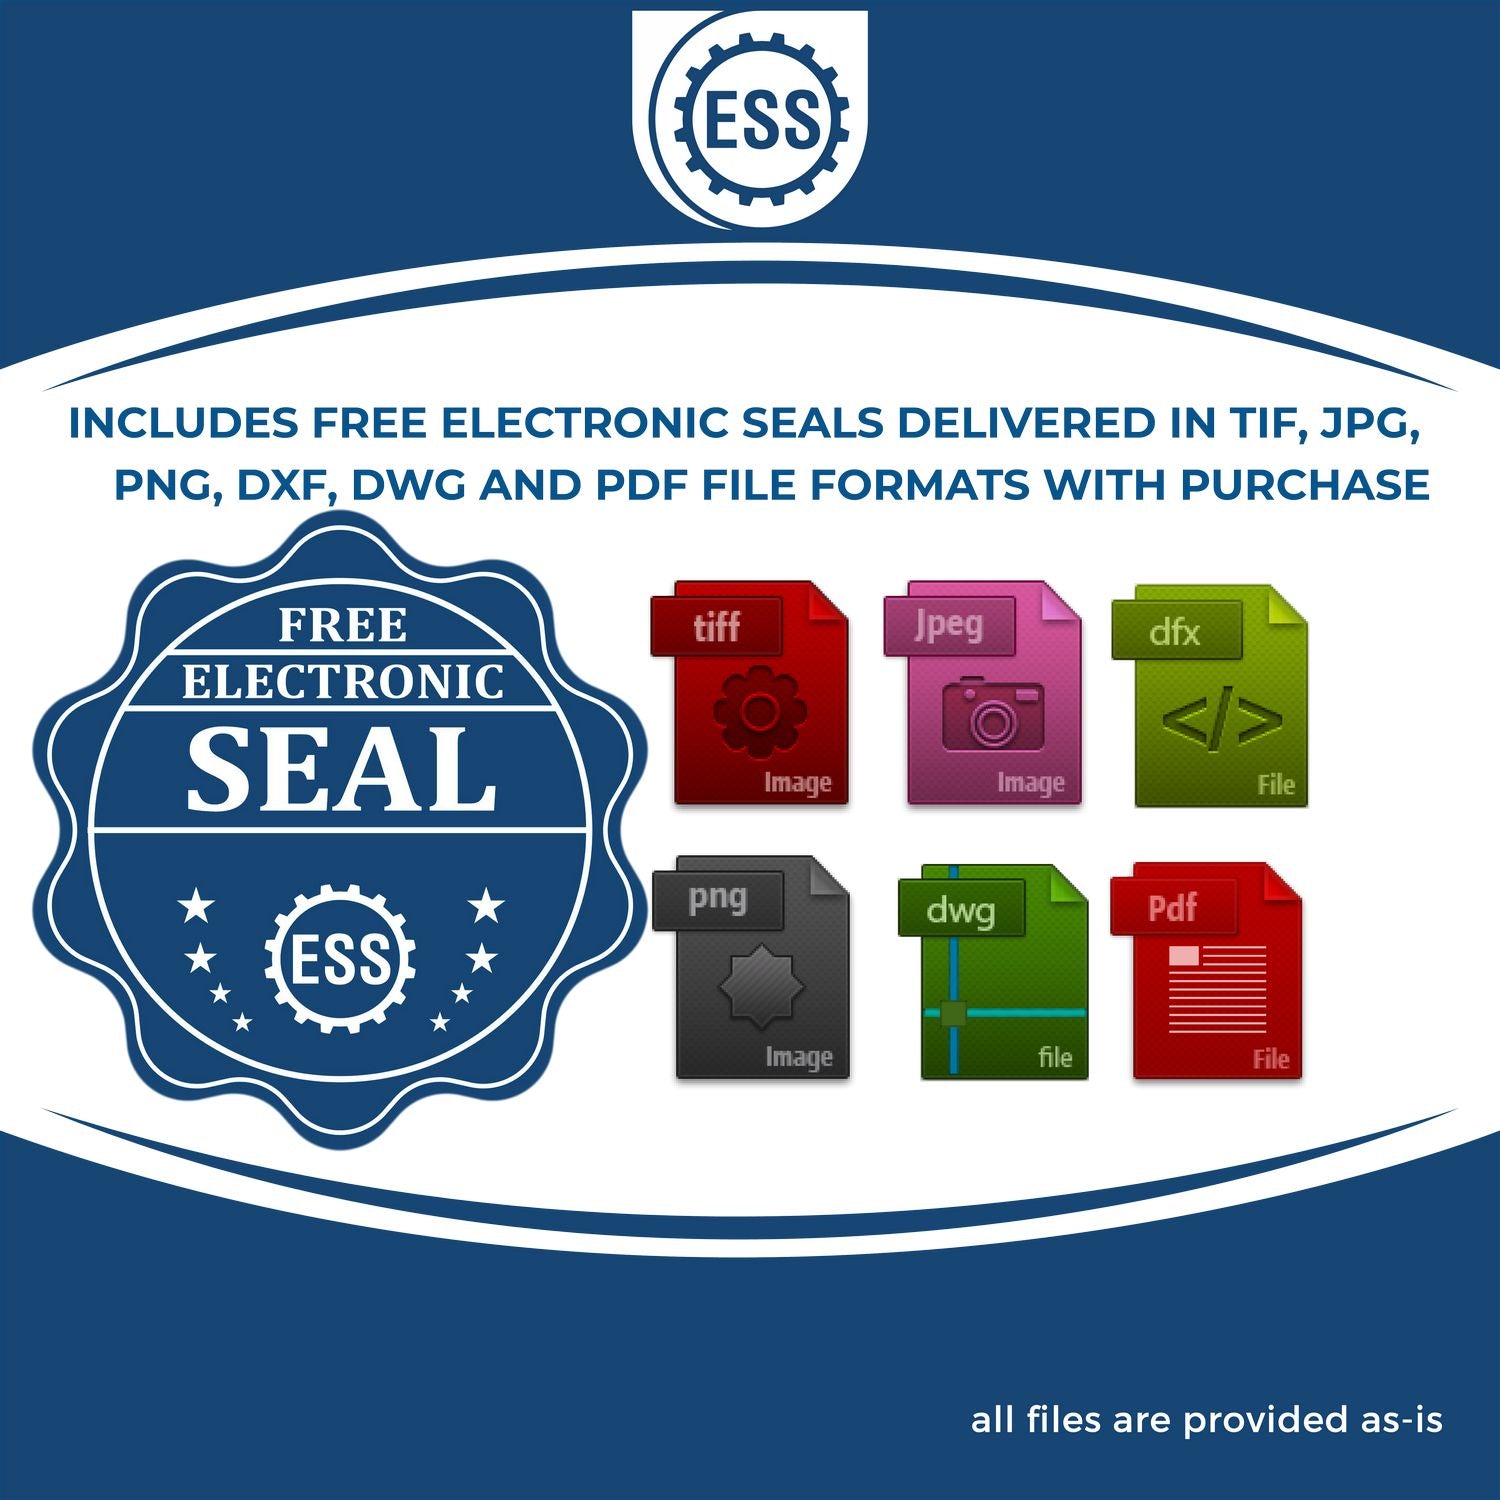 An infographic for the free electronic seal for the Wooden Handle Mississippi State Seal Notary Public Stamp illustrating the different file type icons such as DXF, DWG, TIF, JPG and PNG.